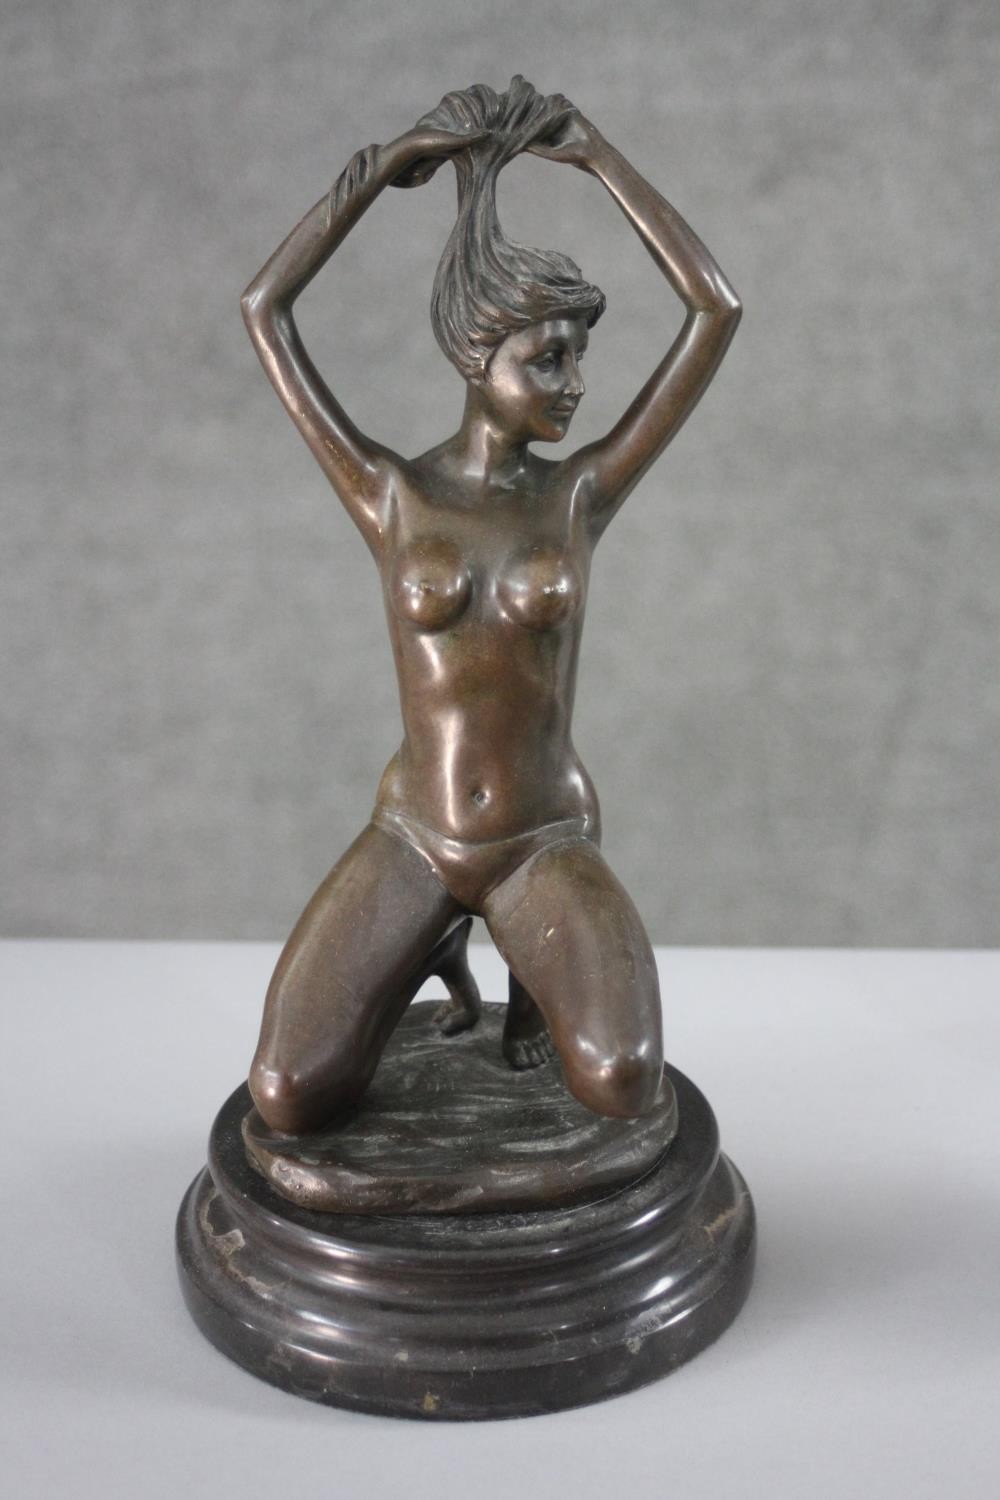 An erotic spelter figure of a kneeling nude woman holding up her hair. H.30 W.16 cm.